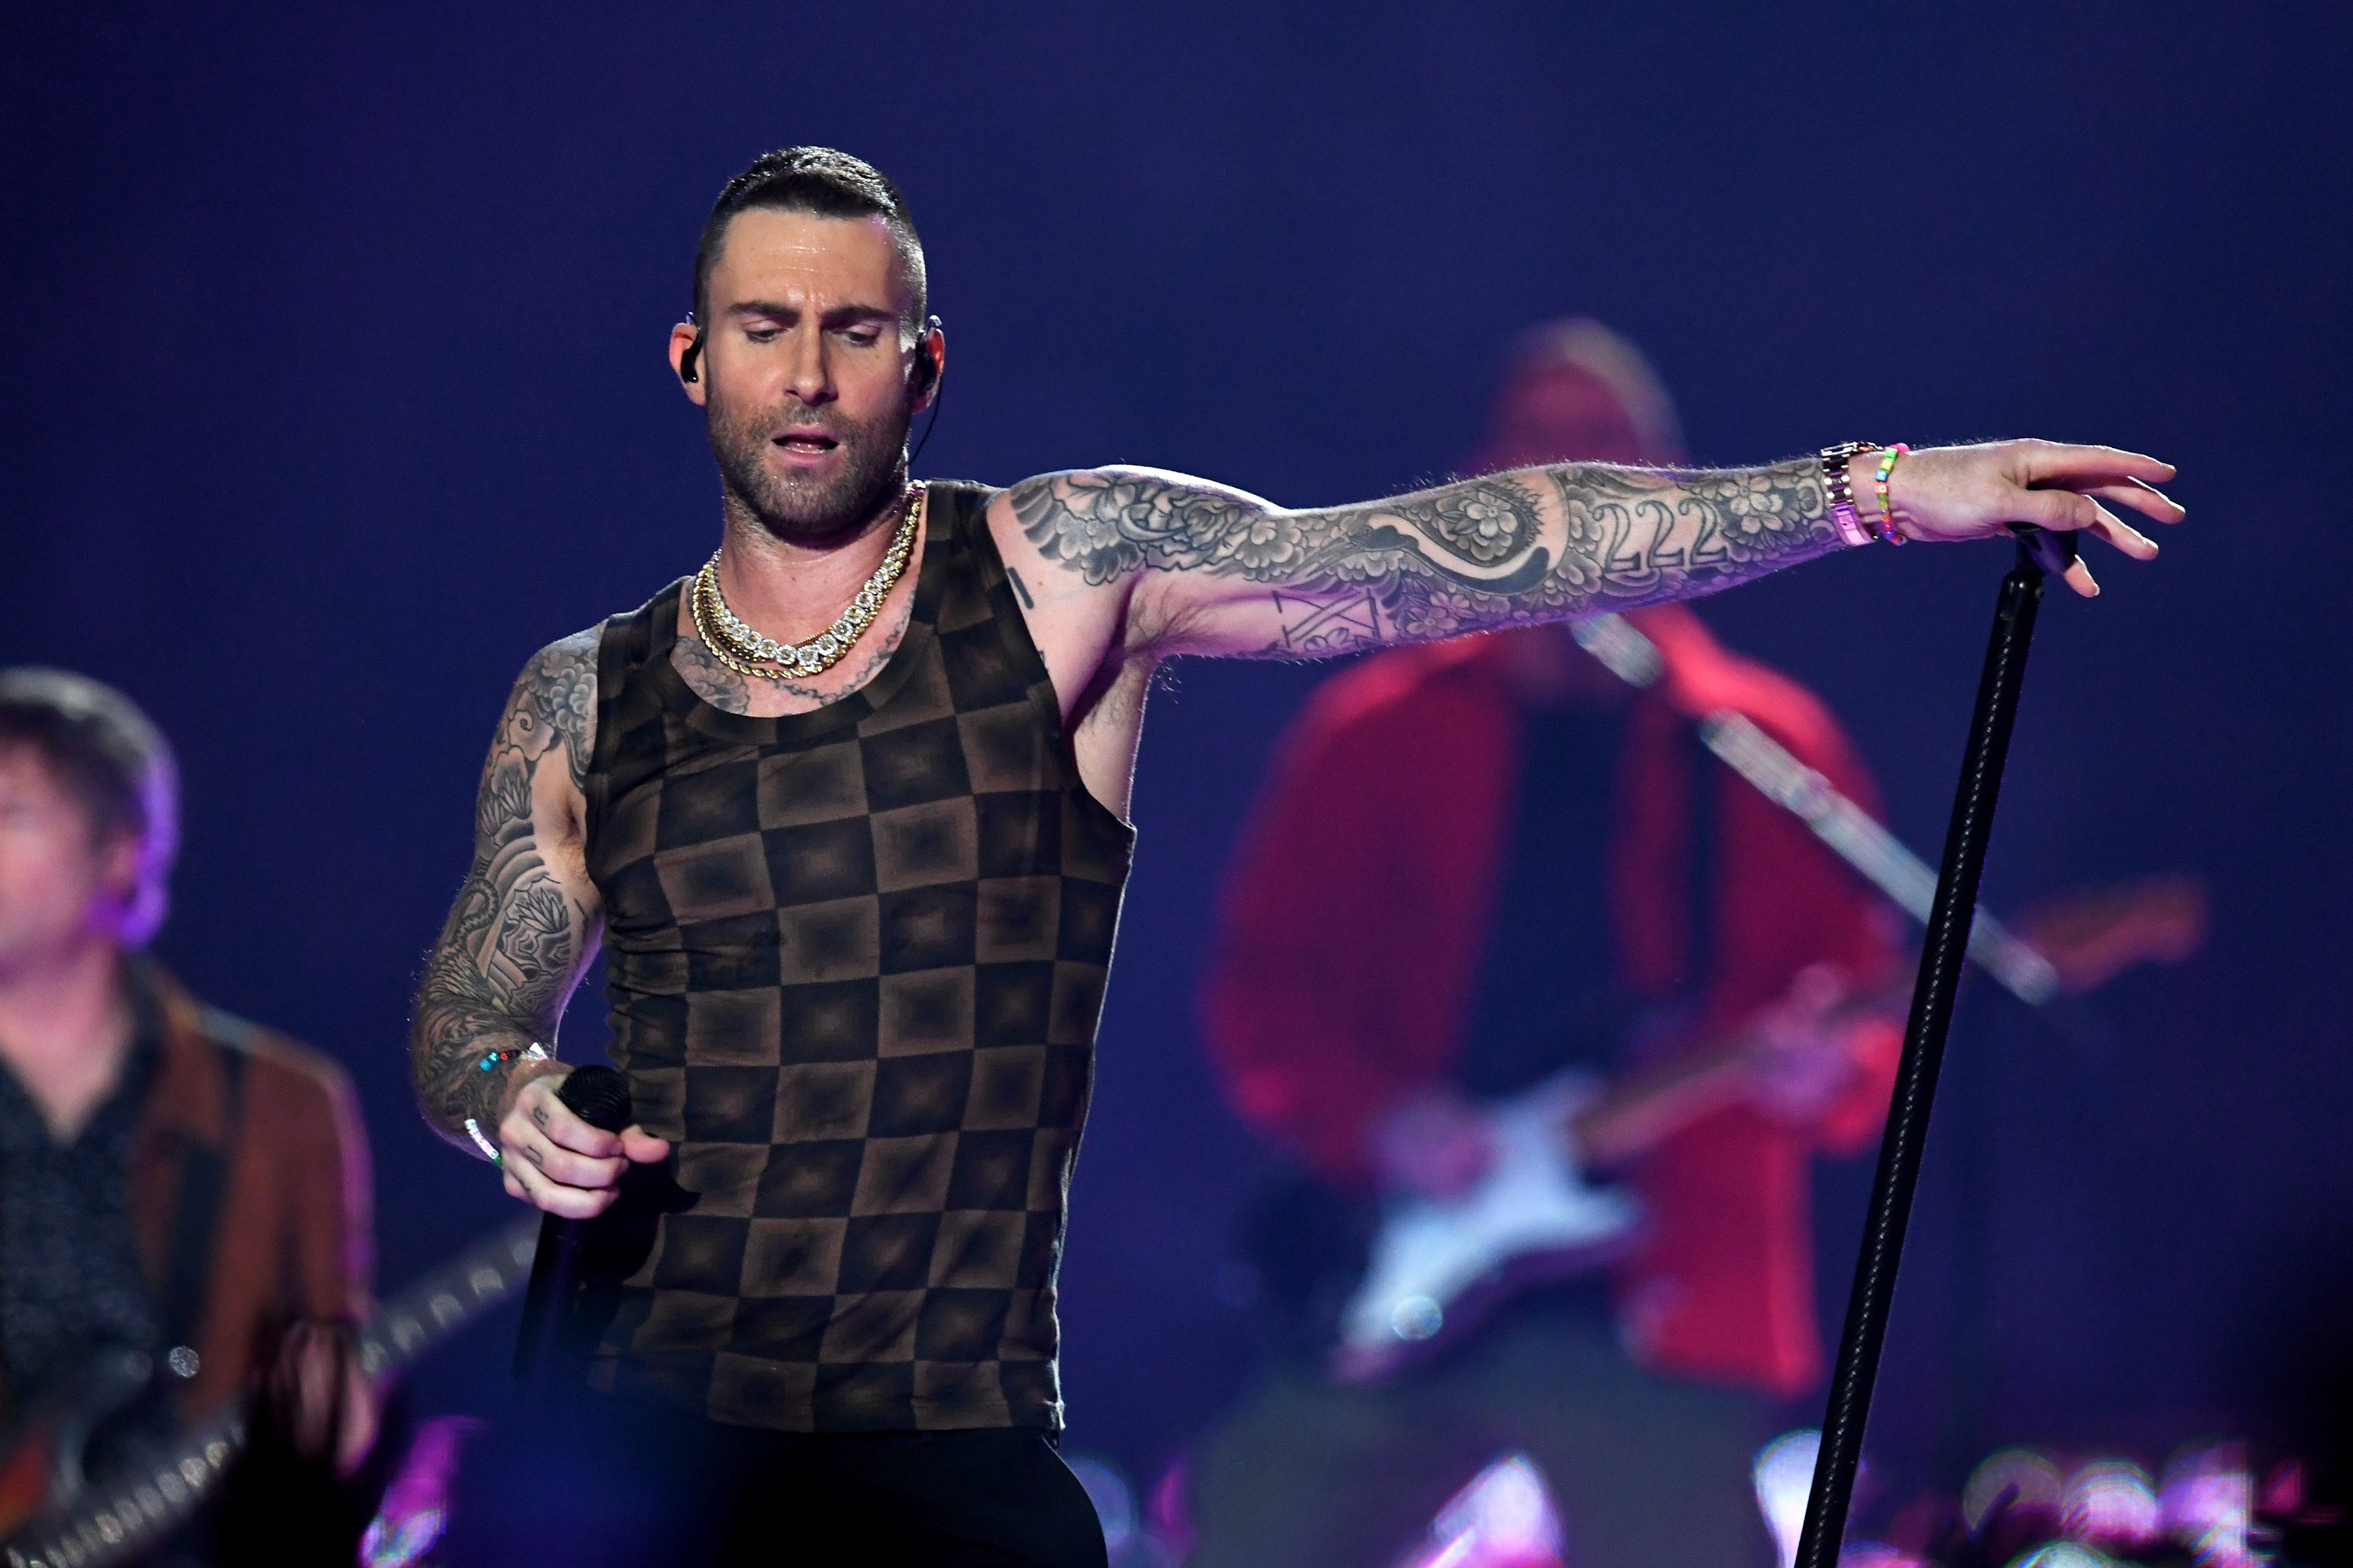 Adam Levine of Maroon 5 performing at the Super Bowl 2019 | Photo: Getty Images